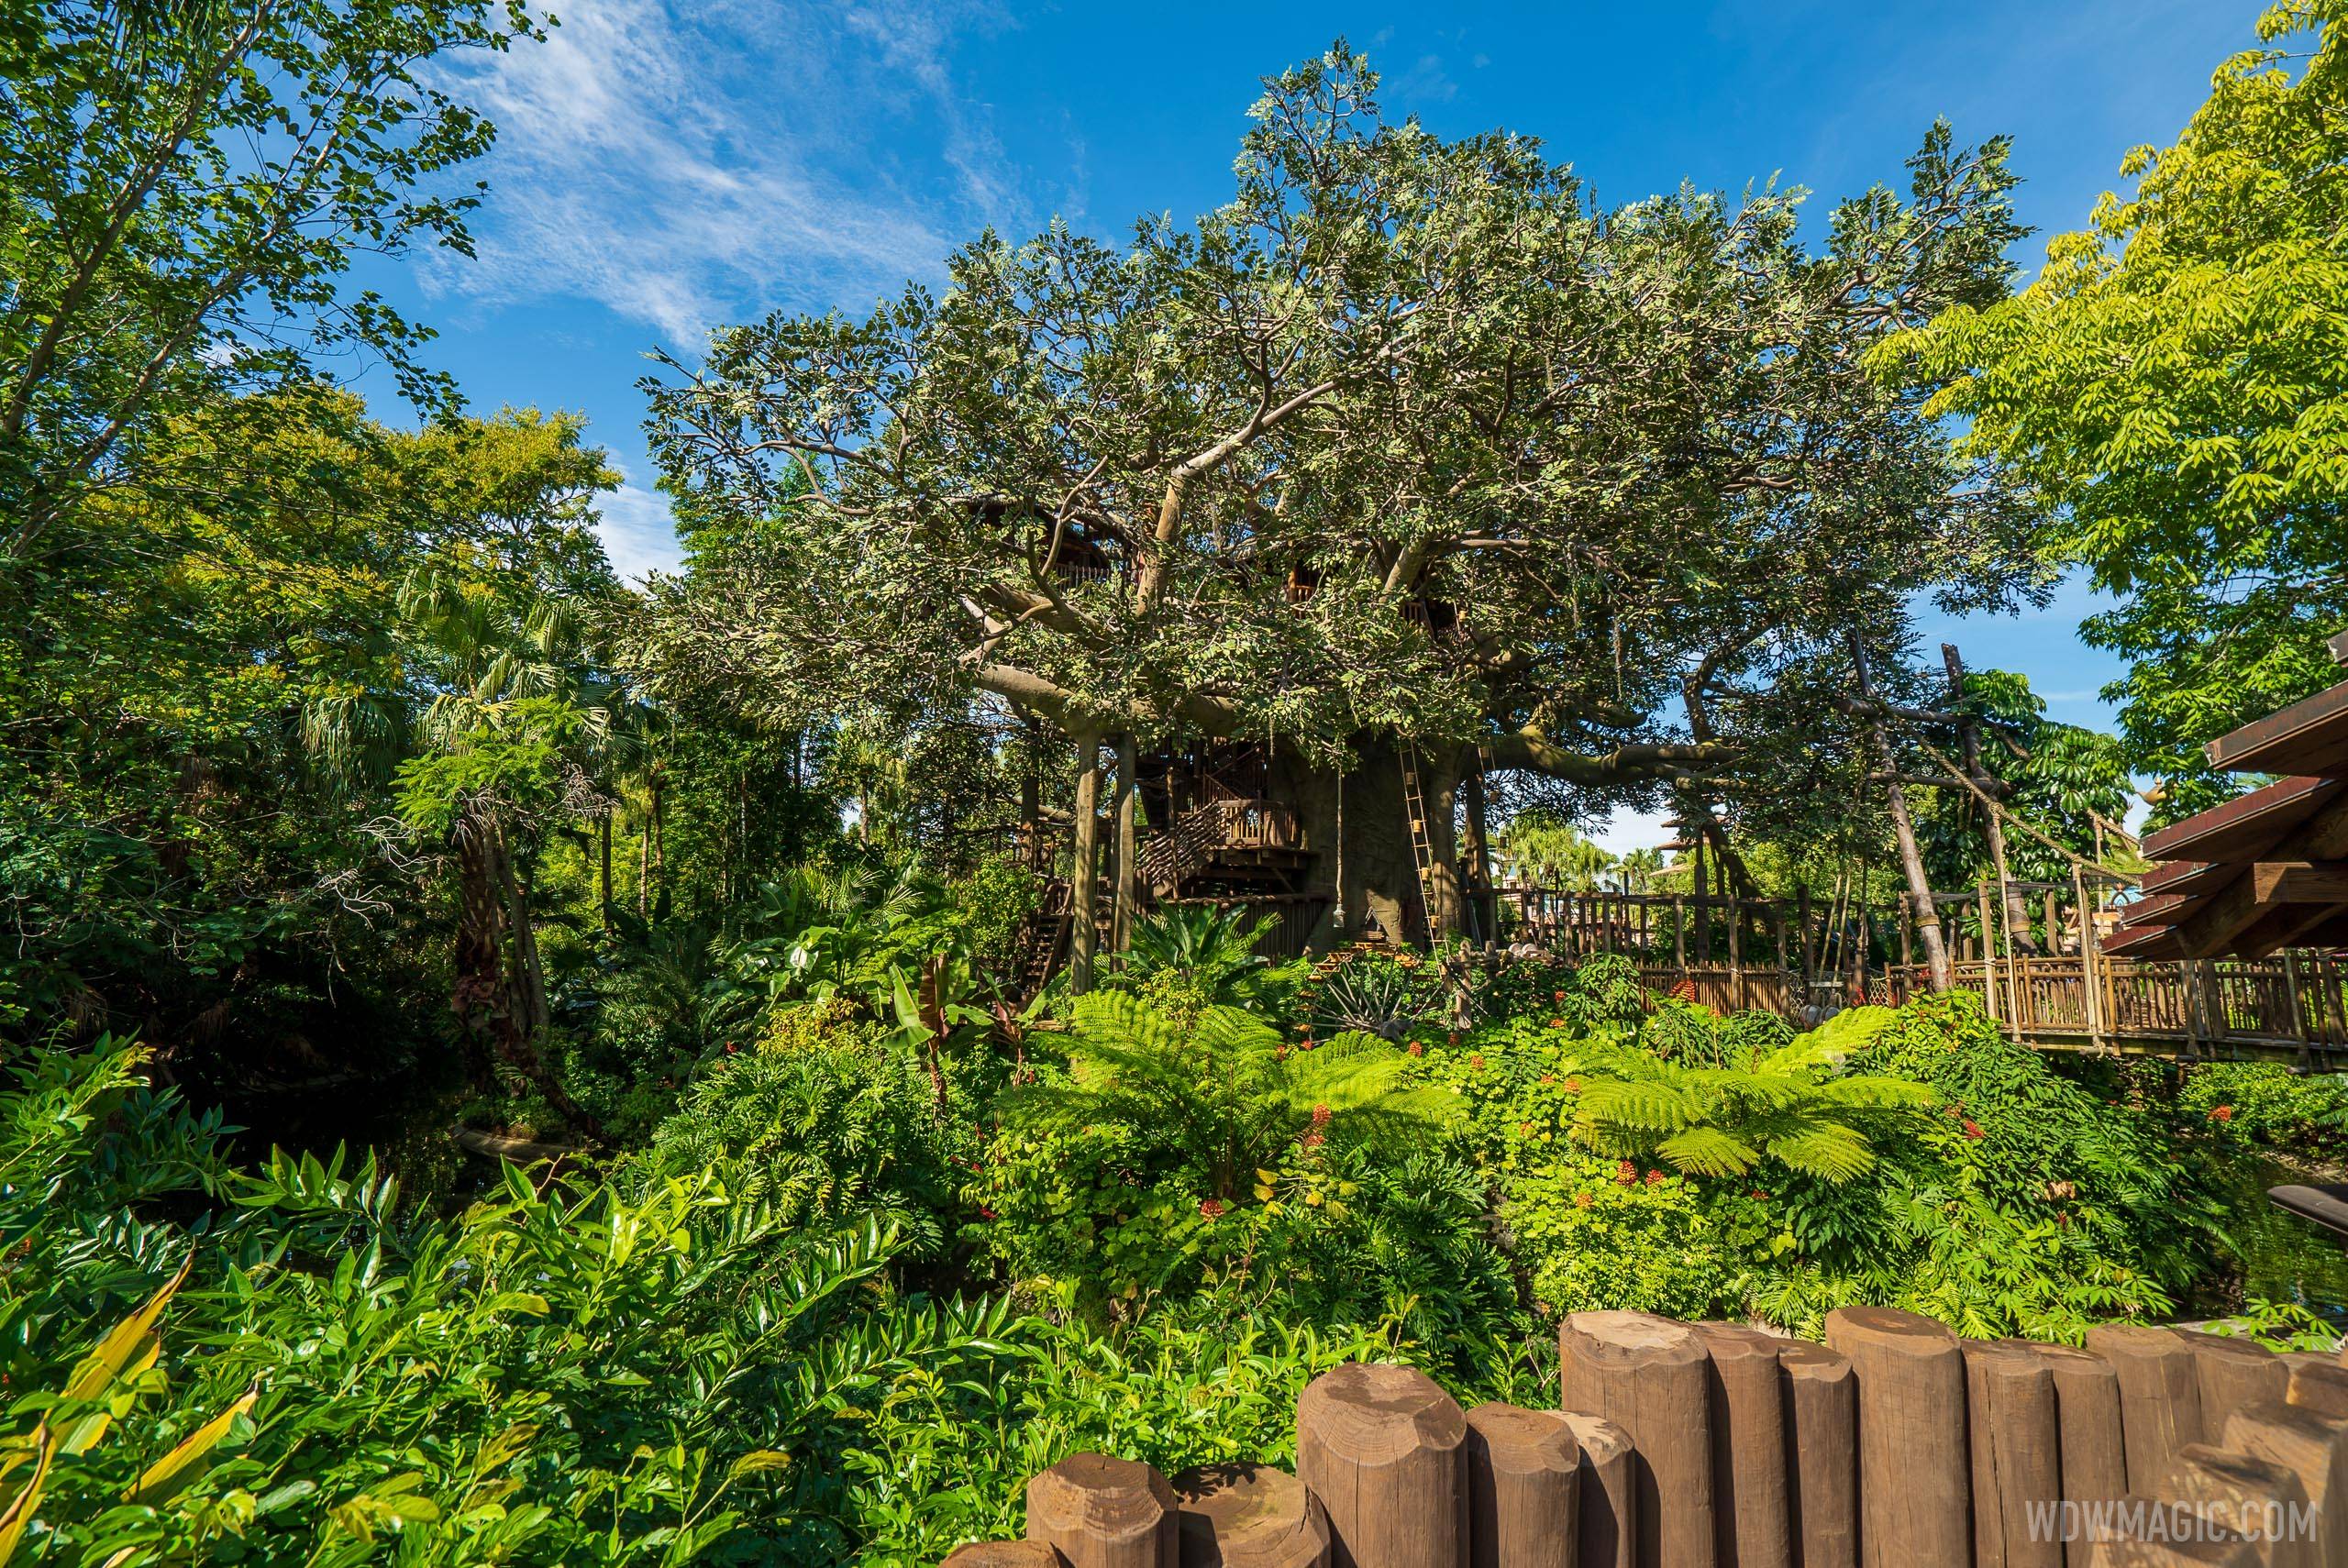 Short refurbishment planned for the Swiss Family Treehouse later this year